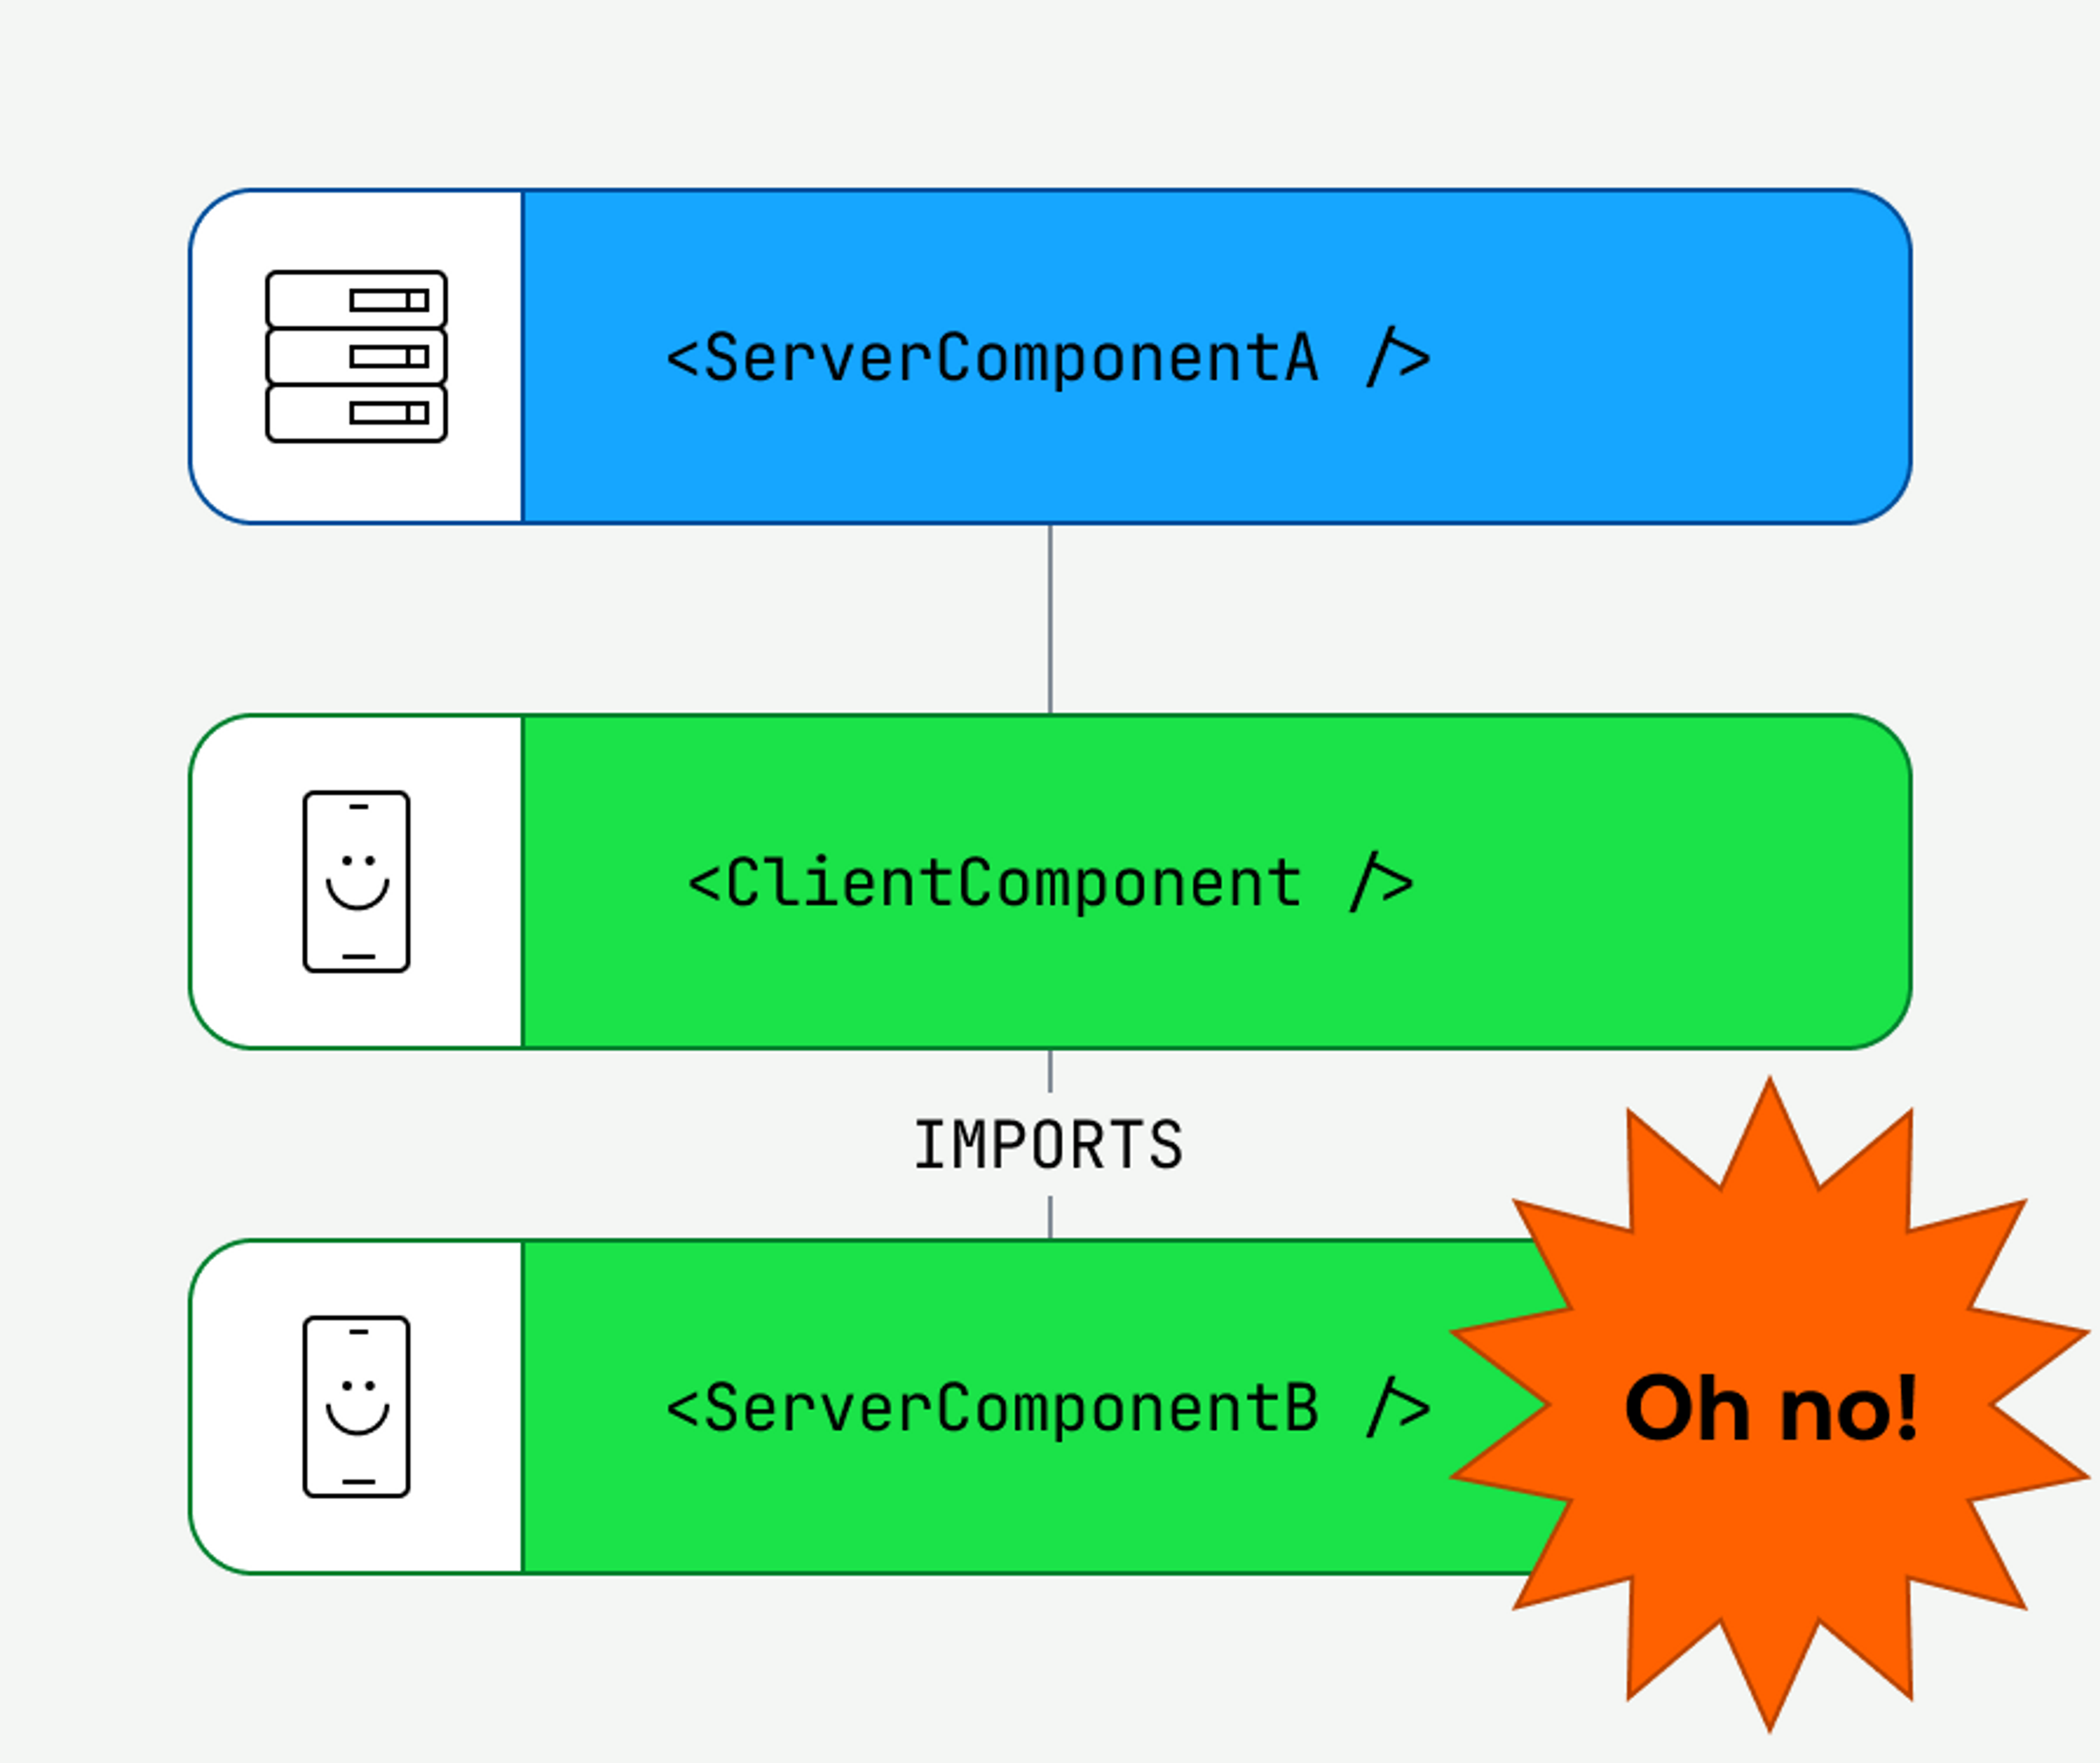 Everything you import from a Client Component will become a Client Component. You might not want this.